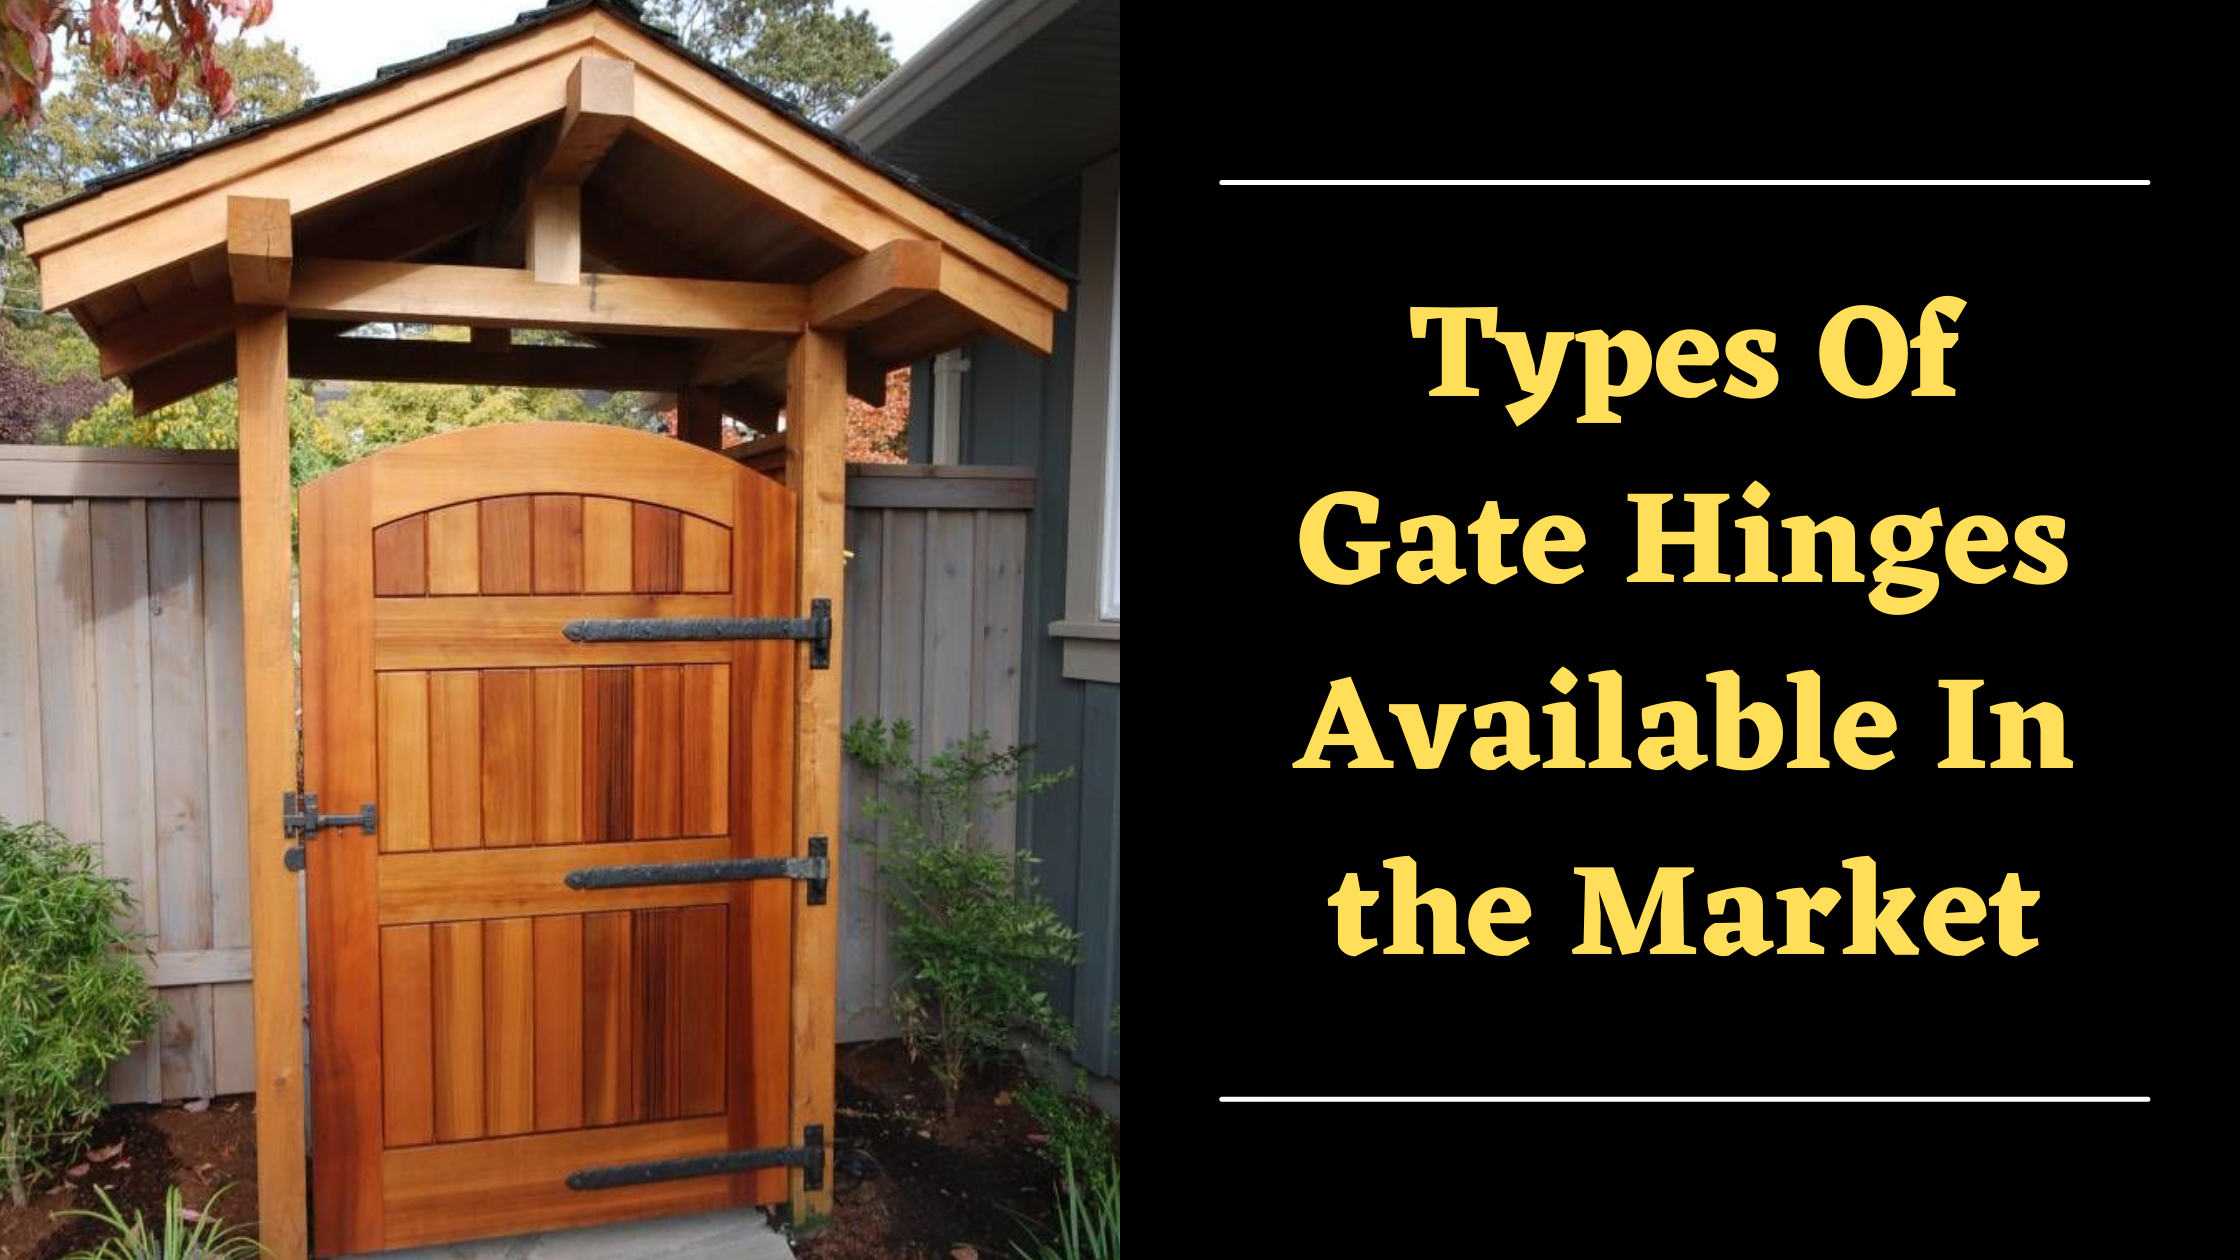 Different Types Of Gate Hinges Available In the Market